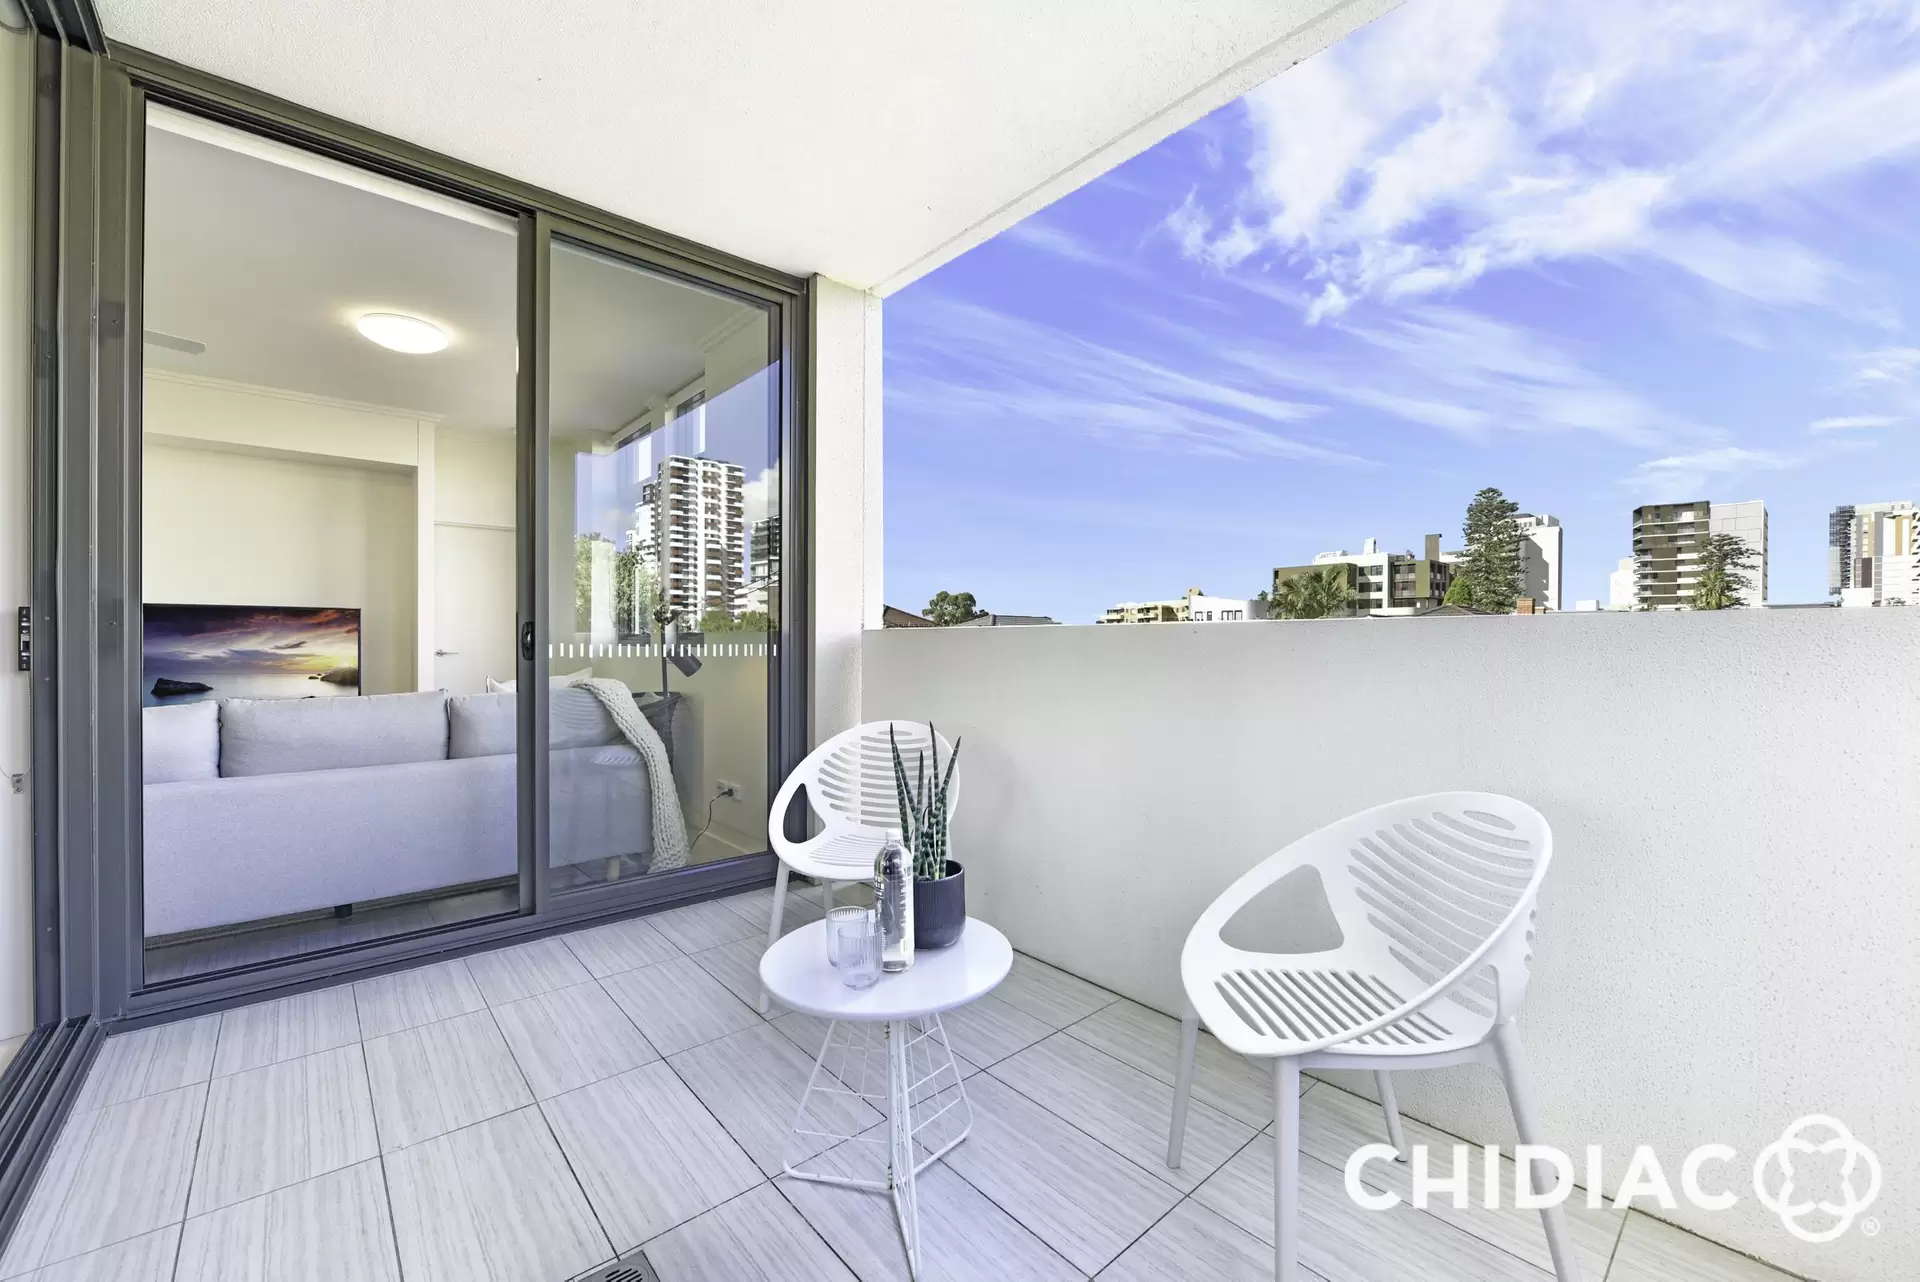 14/9 Carilla Street, Burwood Leased by Chidiac Realty - image 1